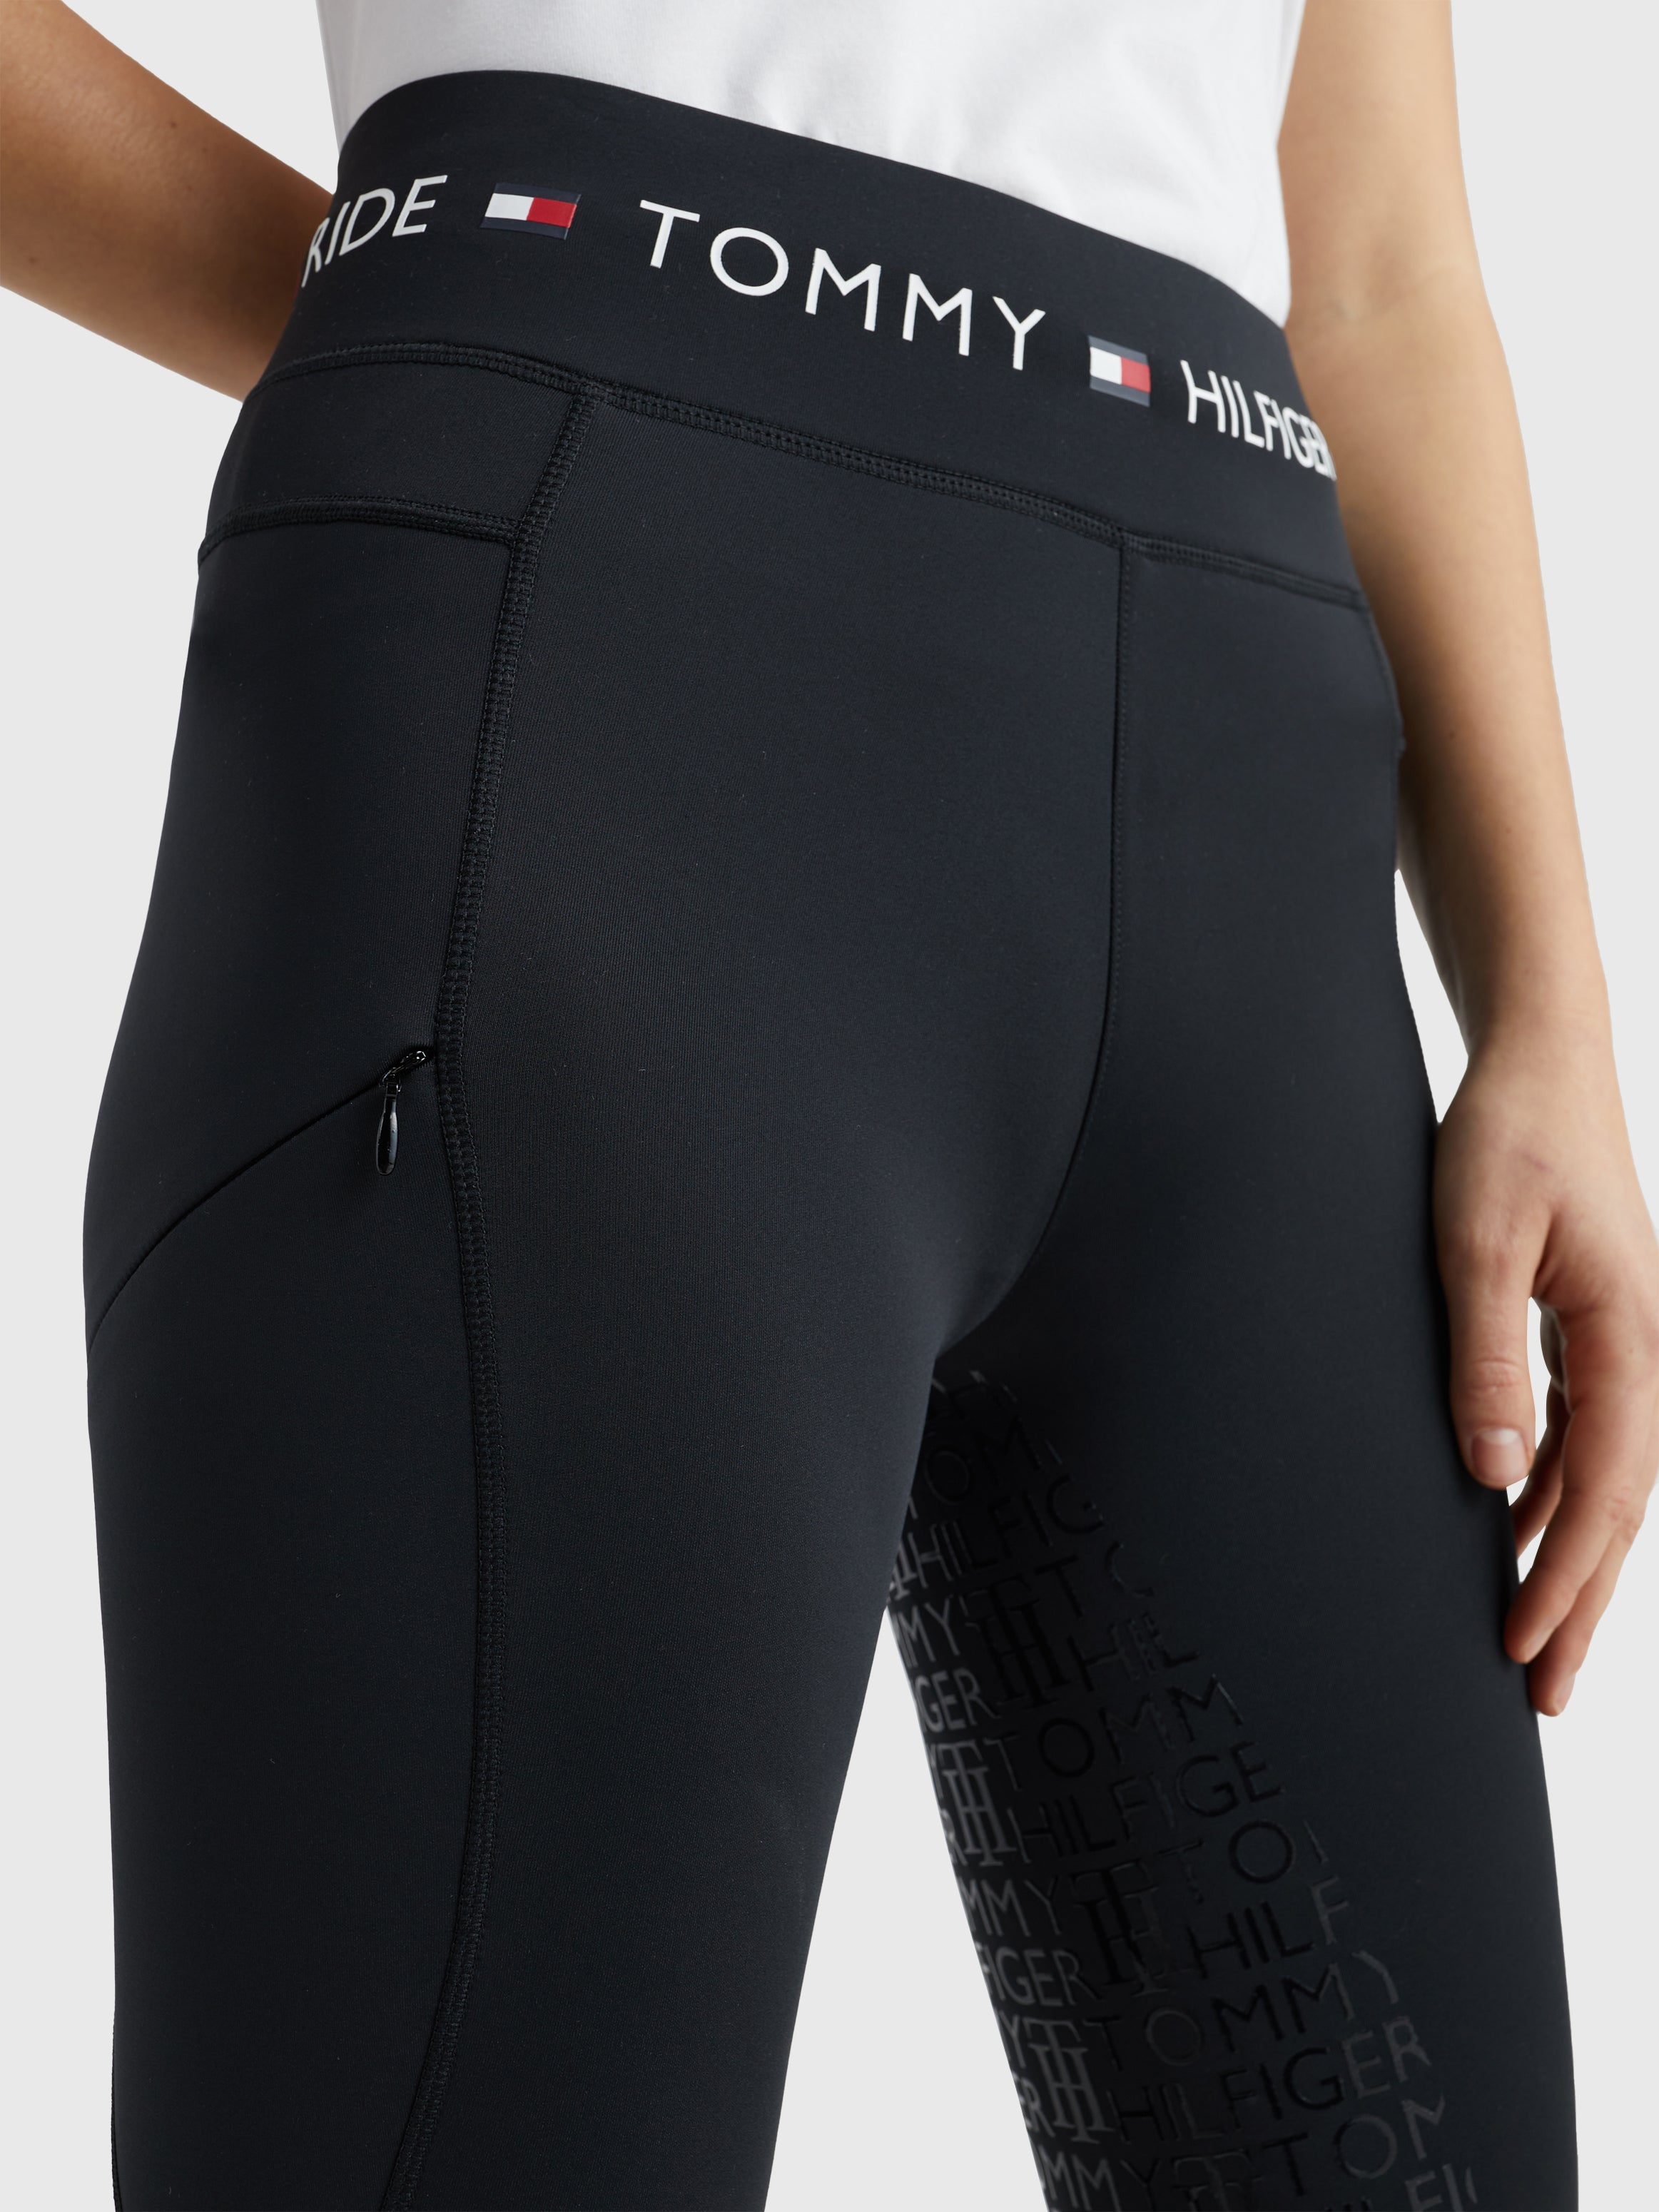 Tommy Hilfiger Full seat smart riding leggings in black – Matchy Dressage